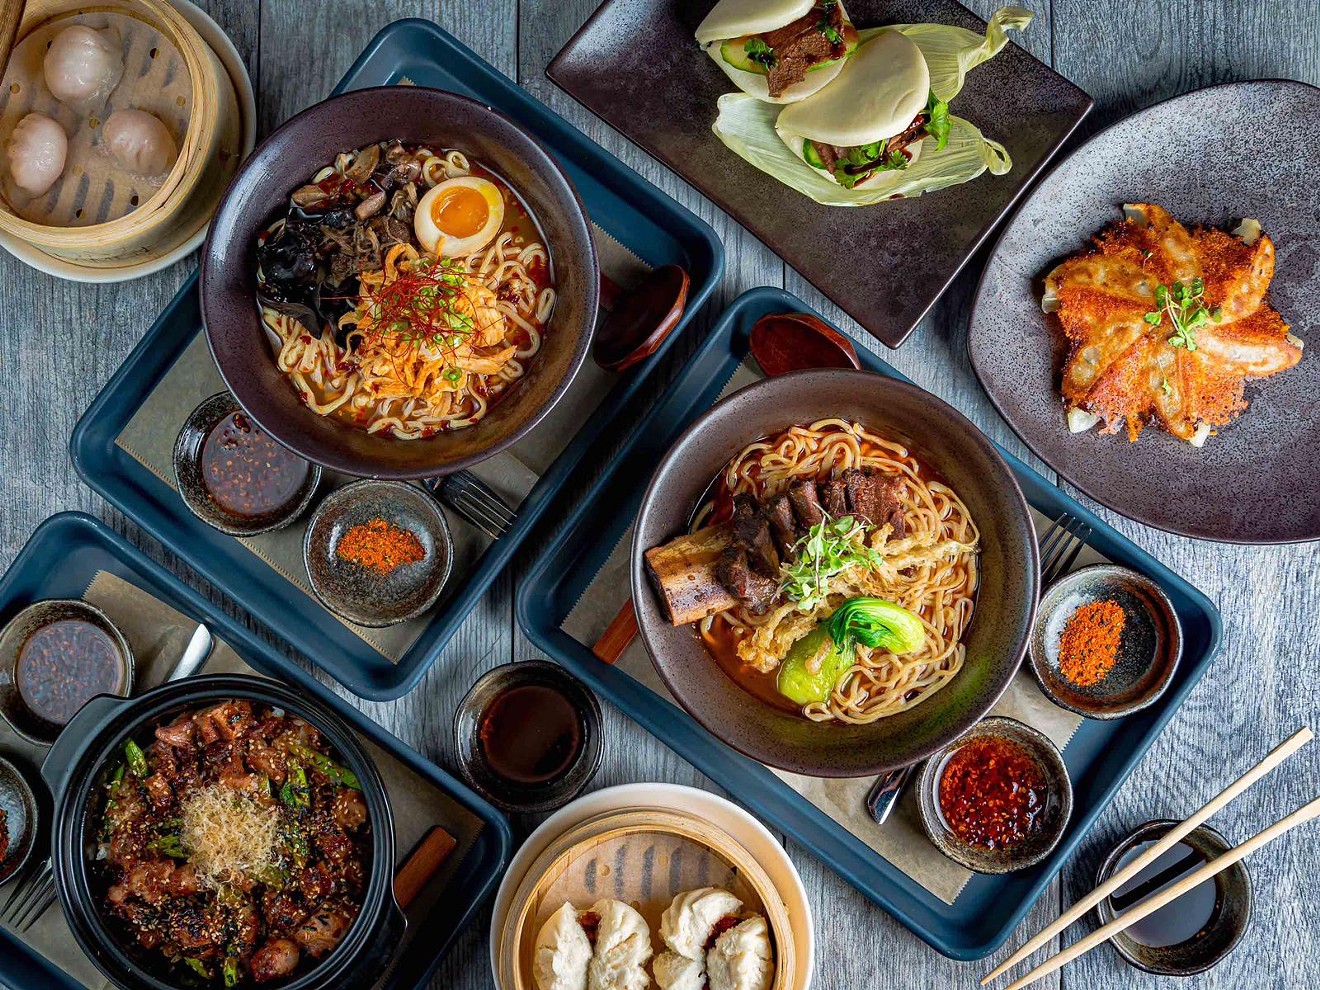 InRamen in South Miami serves creative pan-Asian takes on everyone's favorite noodle soup.